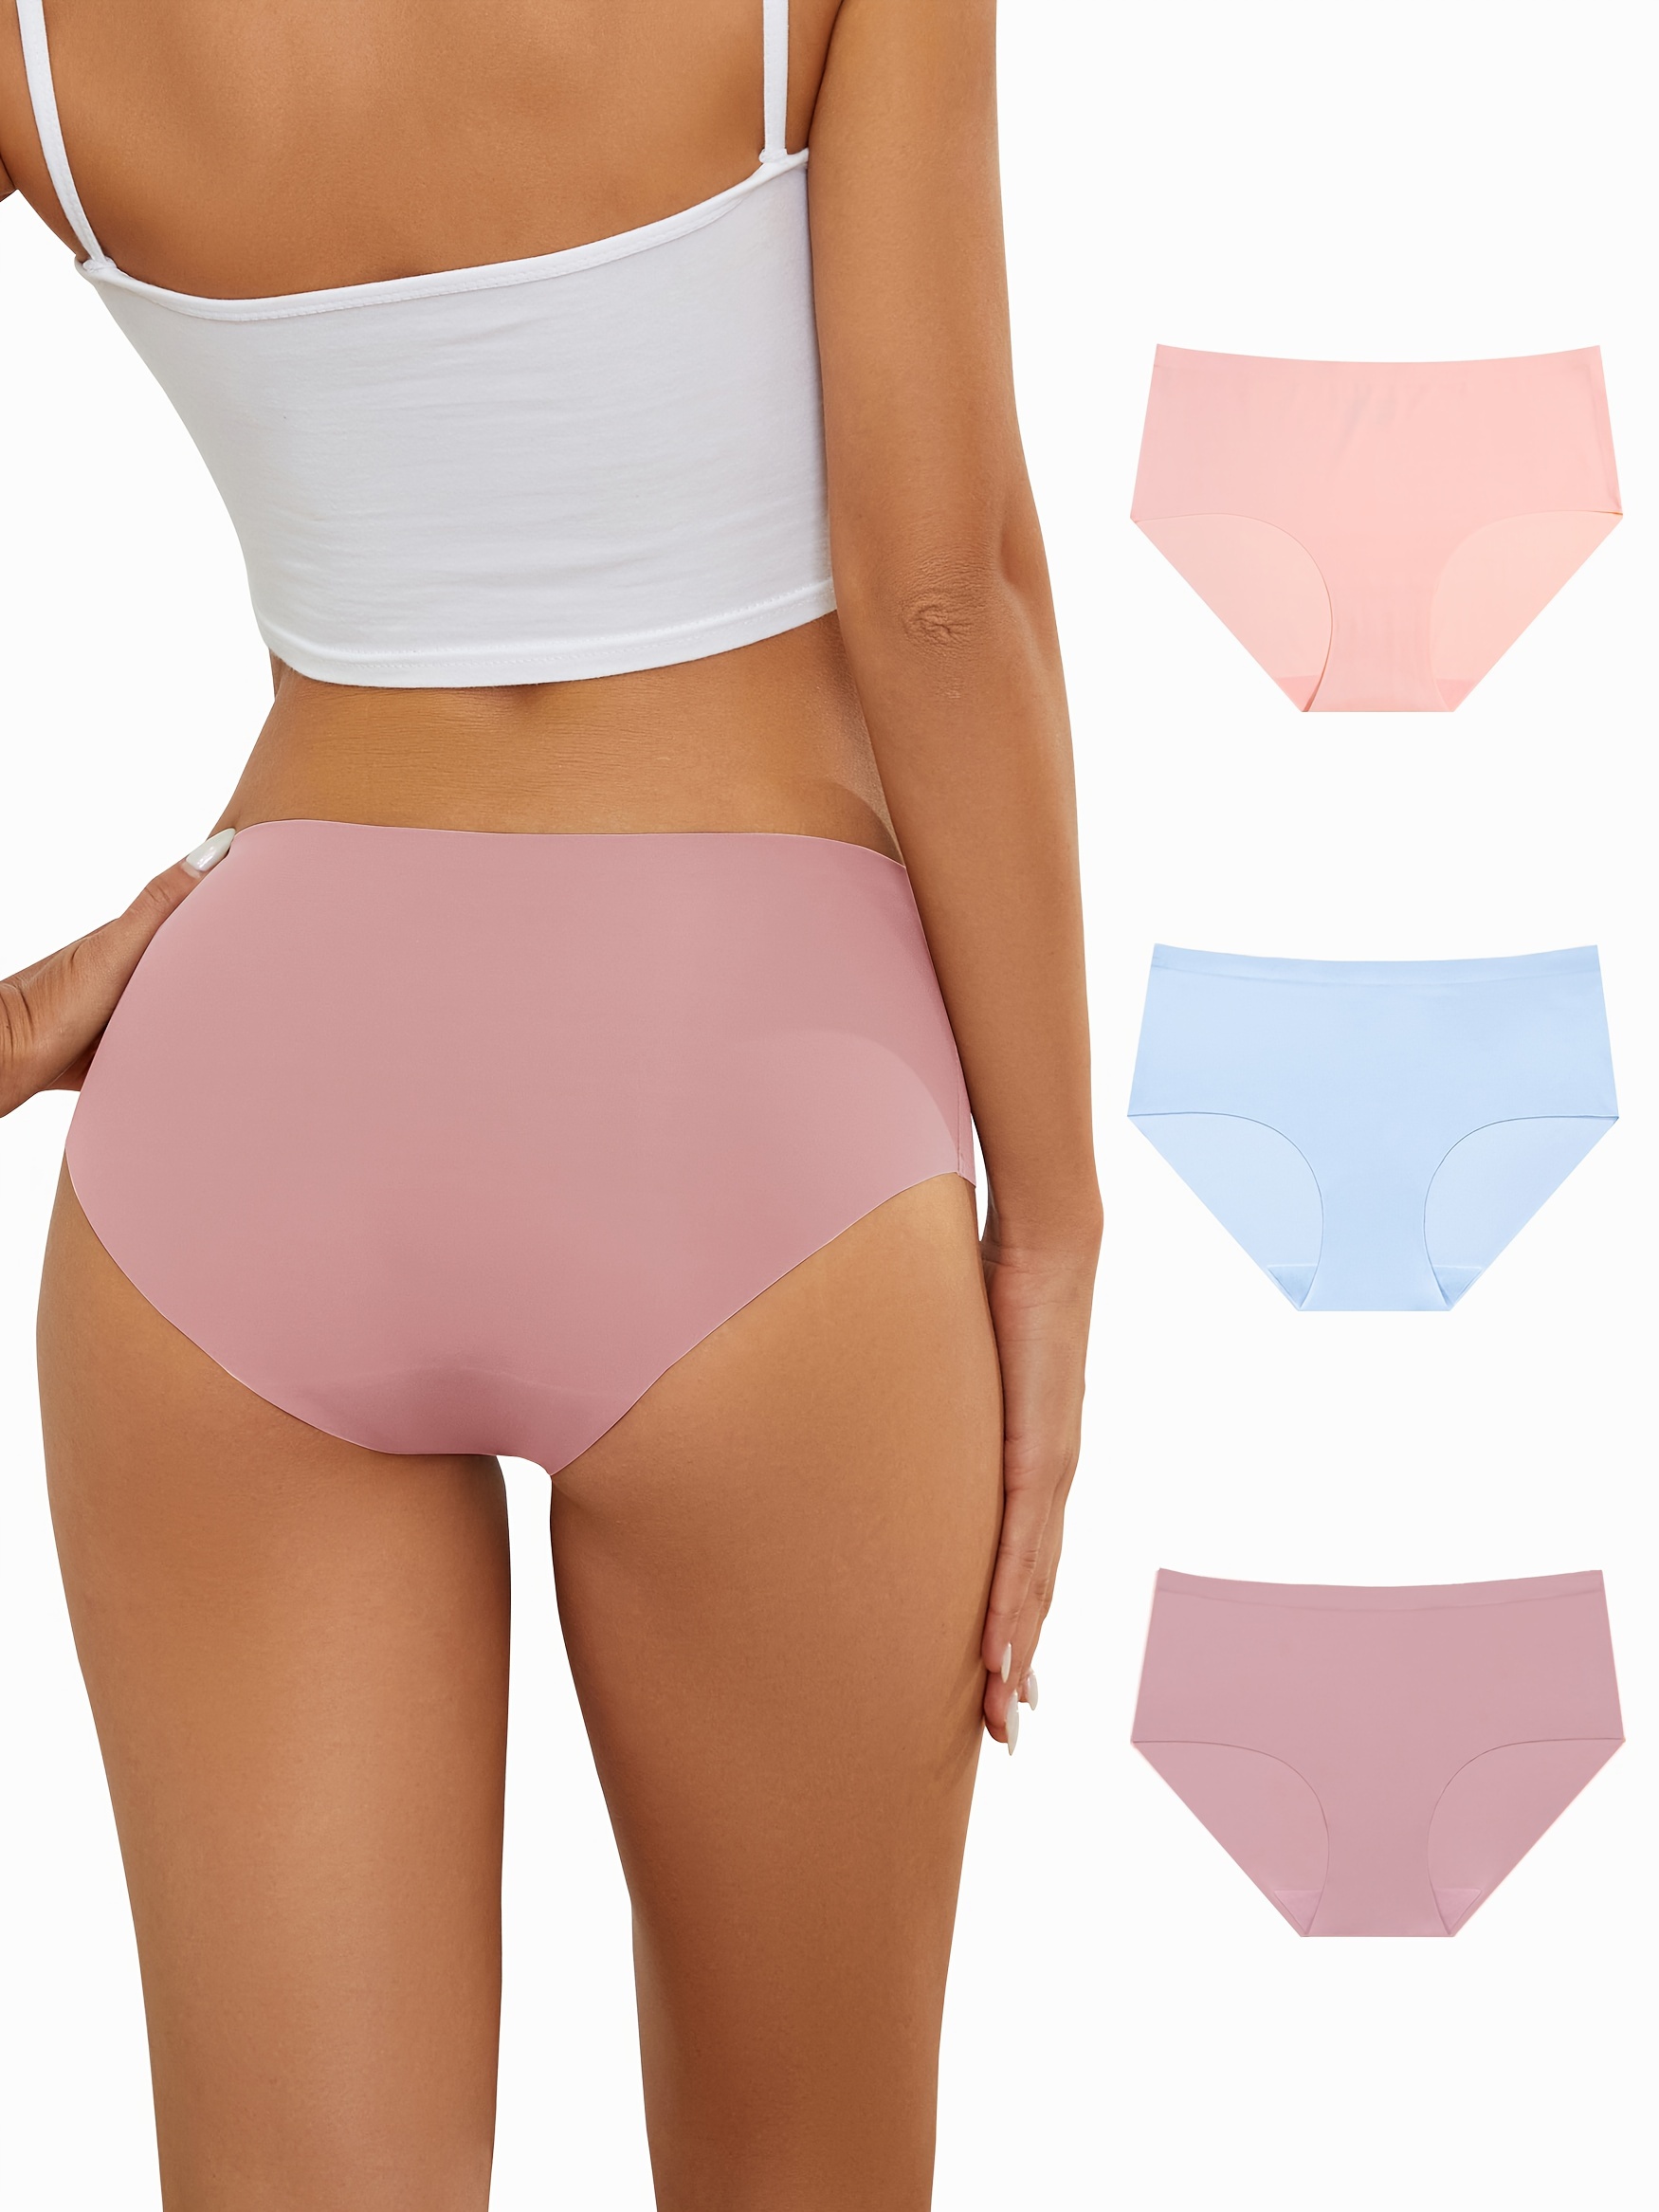 Simple Solid Panties Comfy Breathable Seamless Skin friendly